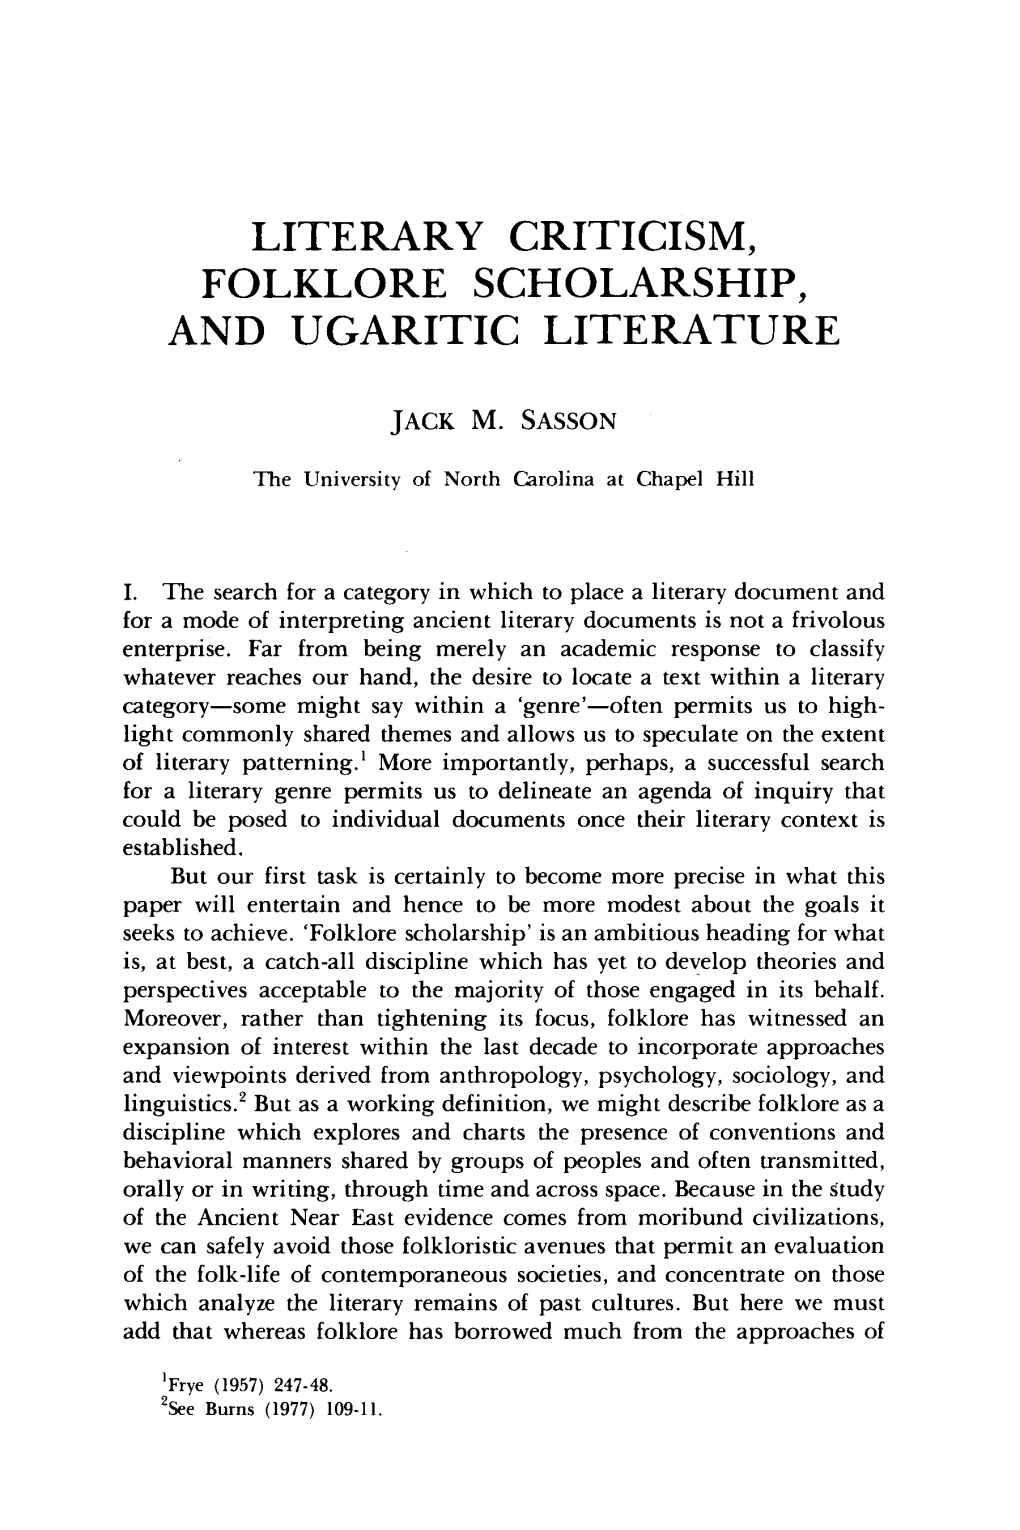 Literary Criticism, Folklore Scholarship, and Ugaritic Literature